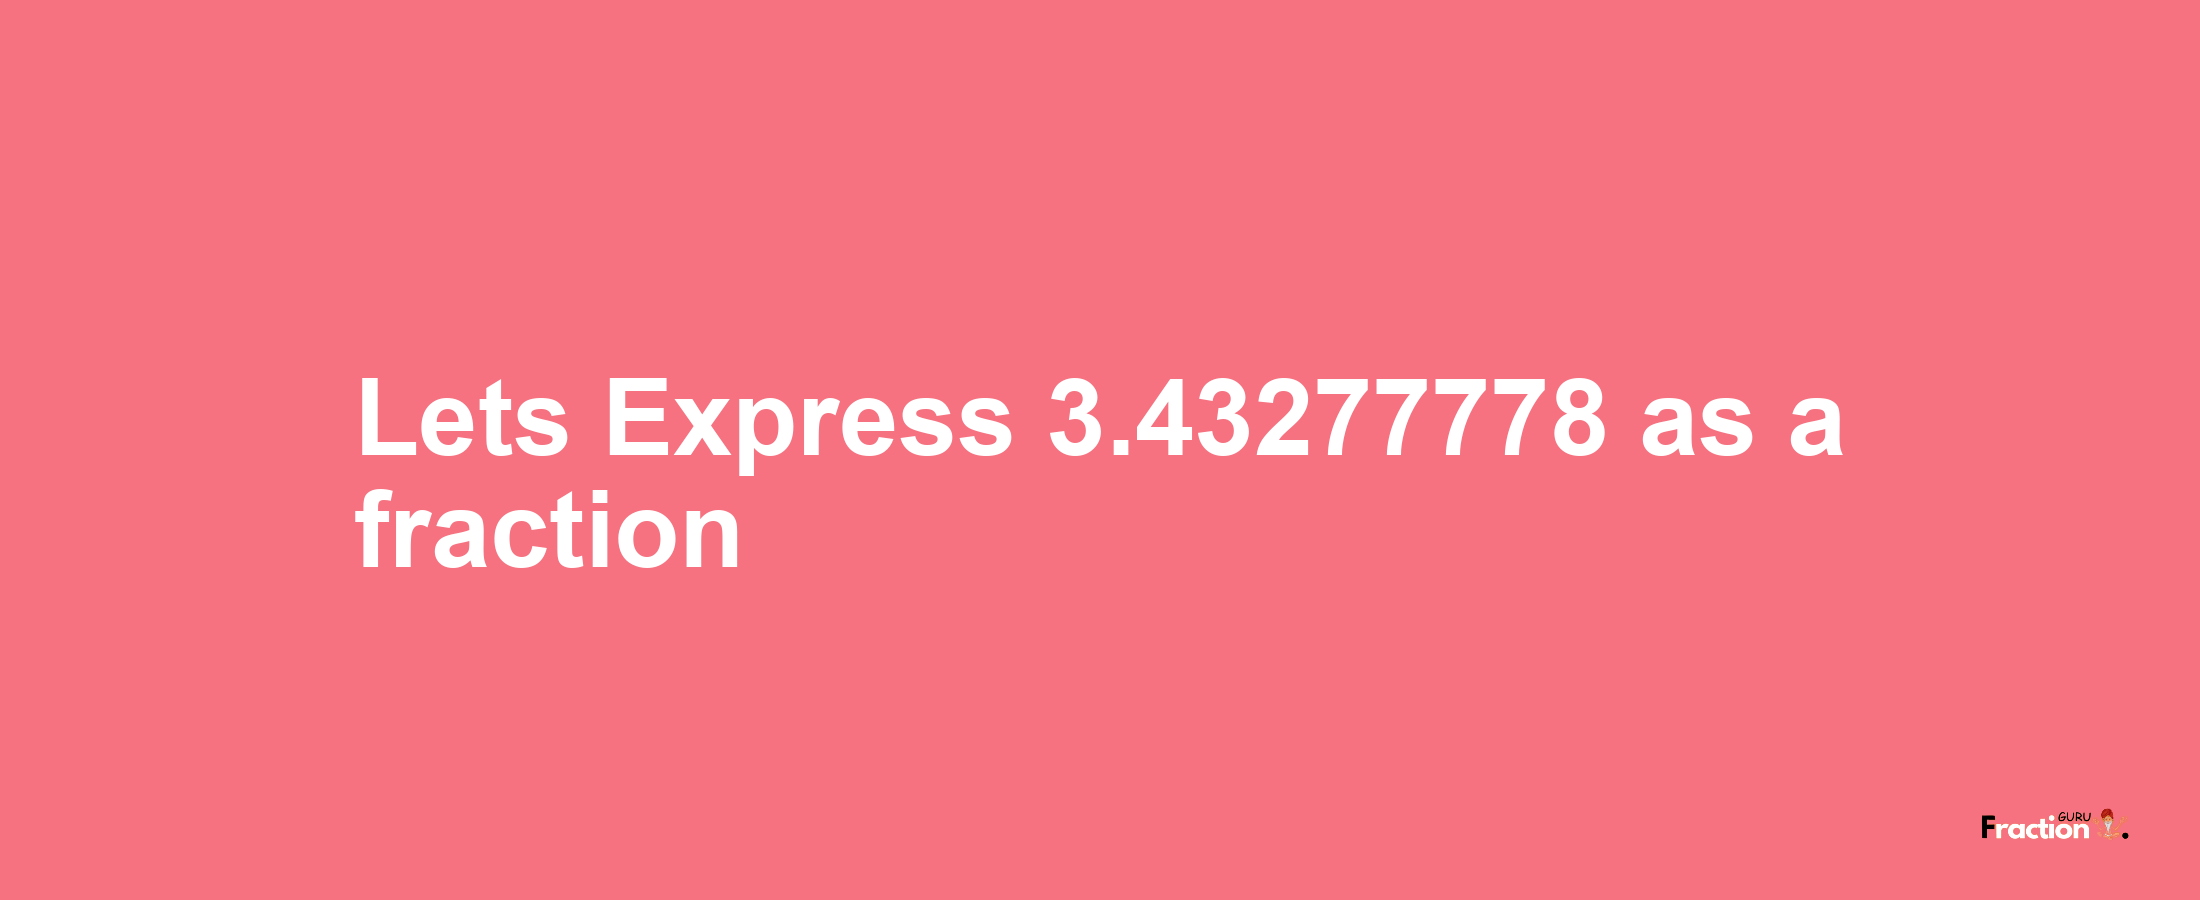 Lets Express 3.43277778 as afraction